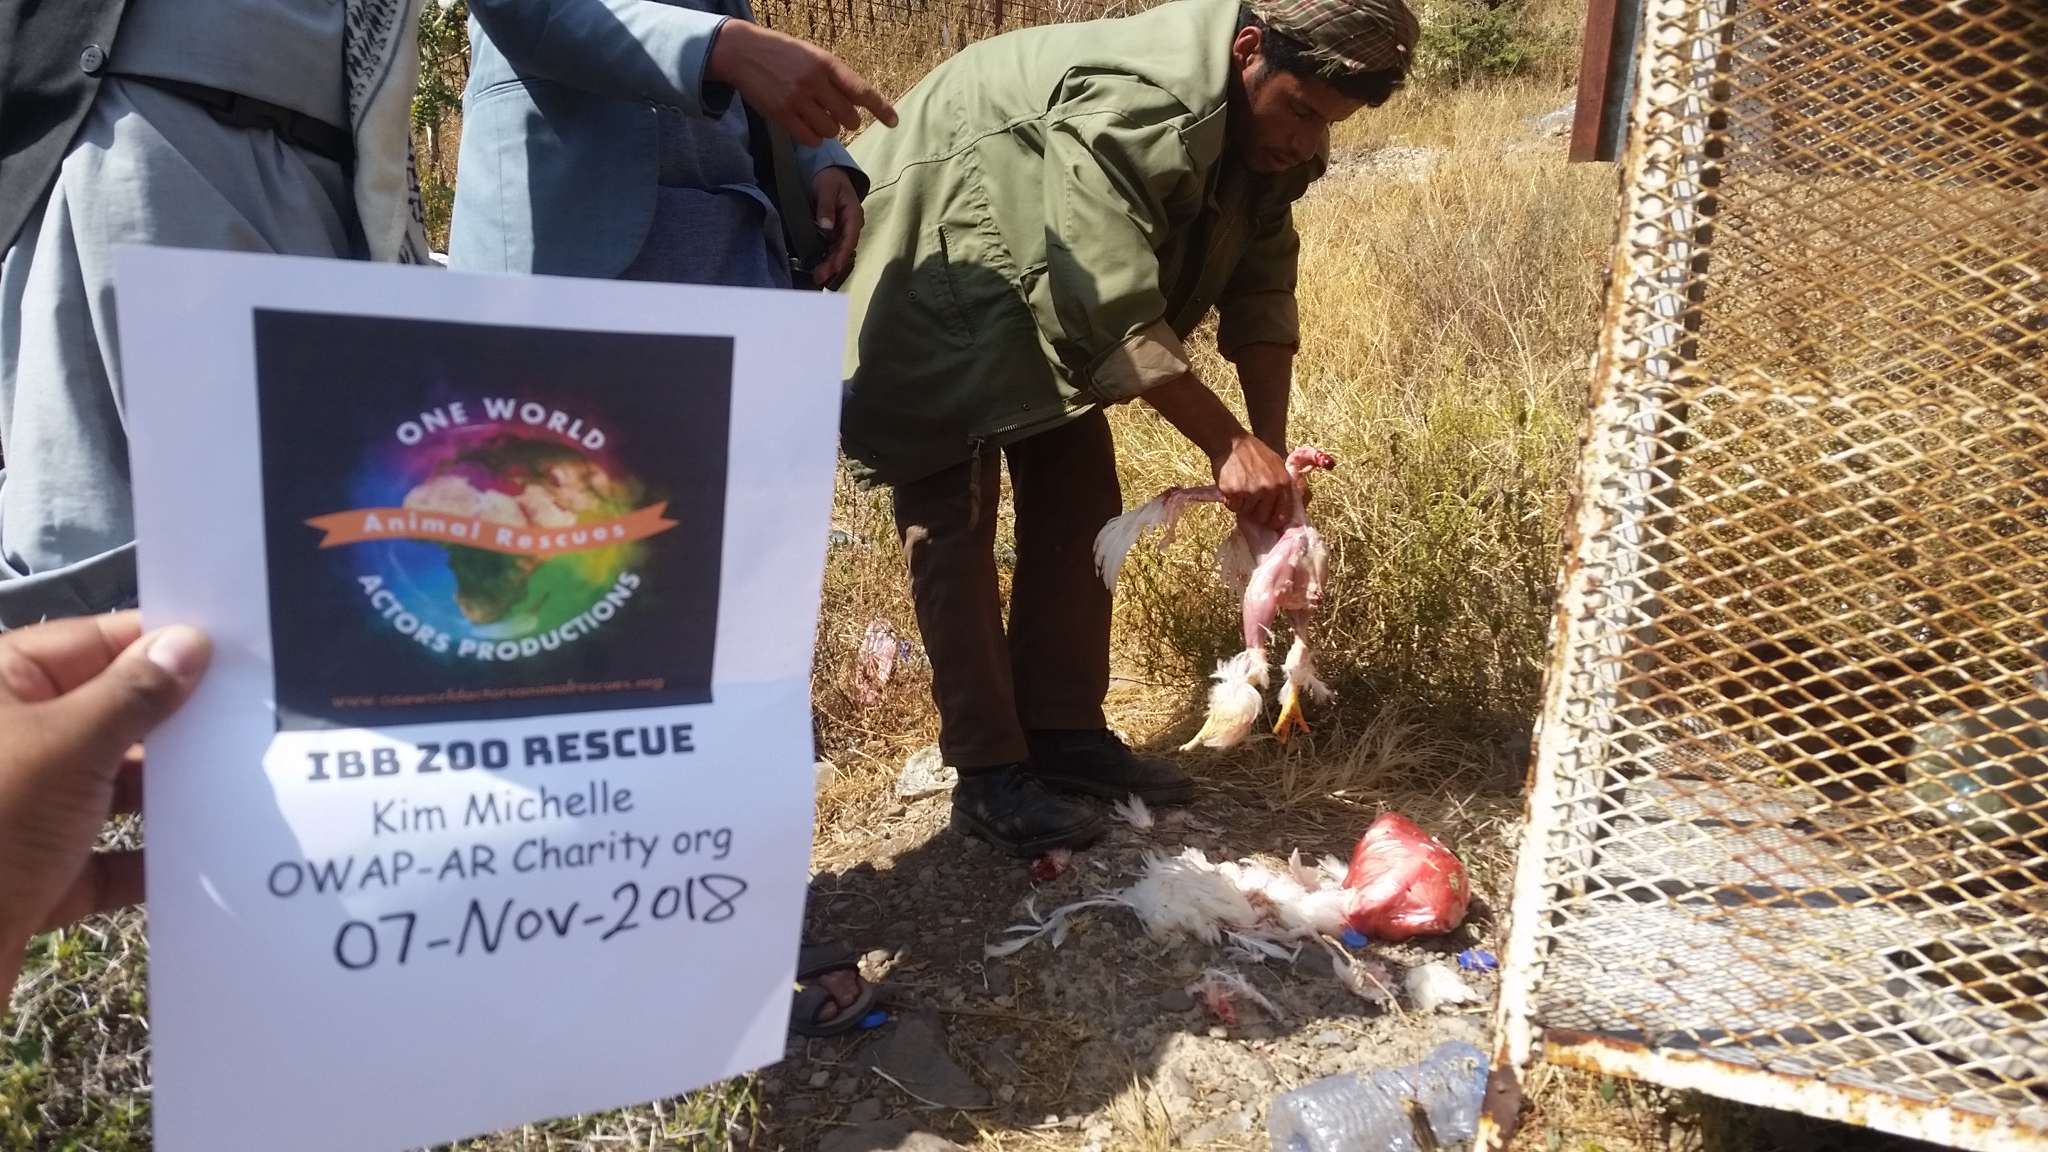 ibb zoo preapruing chicken for eagle Yemen rescue by OWAP-AR with our sign by Hisham.jpg